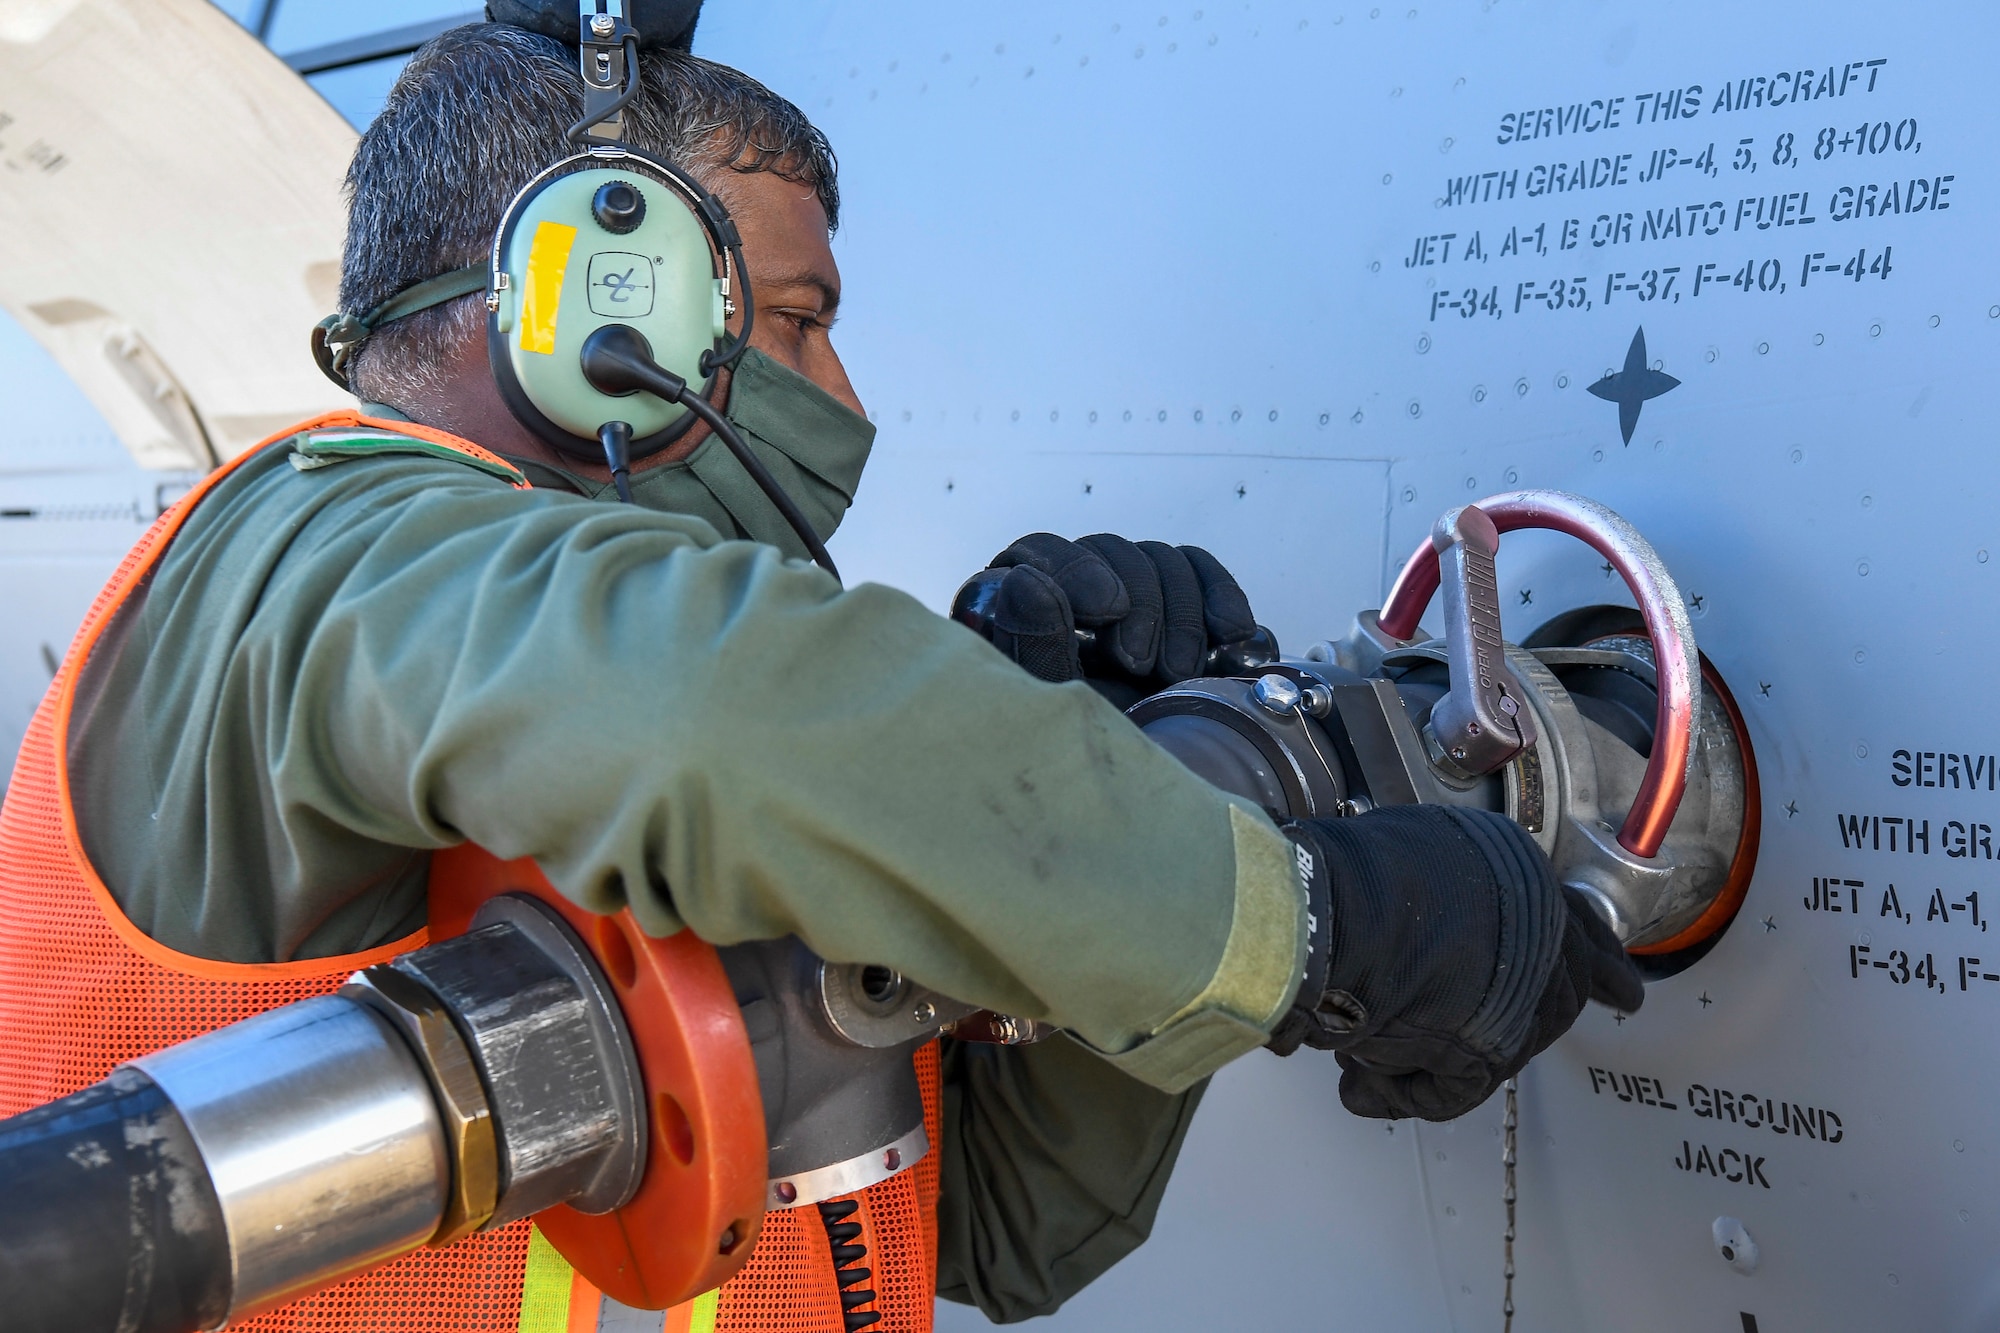 A member of the Indian air force 28th Wing attaches a fuel hose to an Indian air force C-17 Globemaster III at Dover Air Force Base, Delaware, Nov. 20, 2020. Dover AFB annually supports $3.5 billion worth of FMS operations due to its strategic location and 436th Aerial Port Squadron, the largest aerial port in the Department of Defense. The United States and India have shared interests in promoting global security, stability and economic prosperity. (U.S. Air Force photo by Senior Airman Christopher Quail)